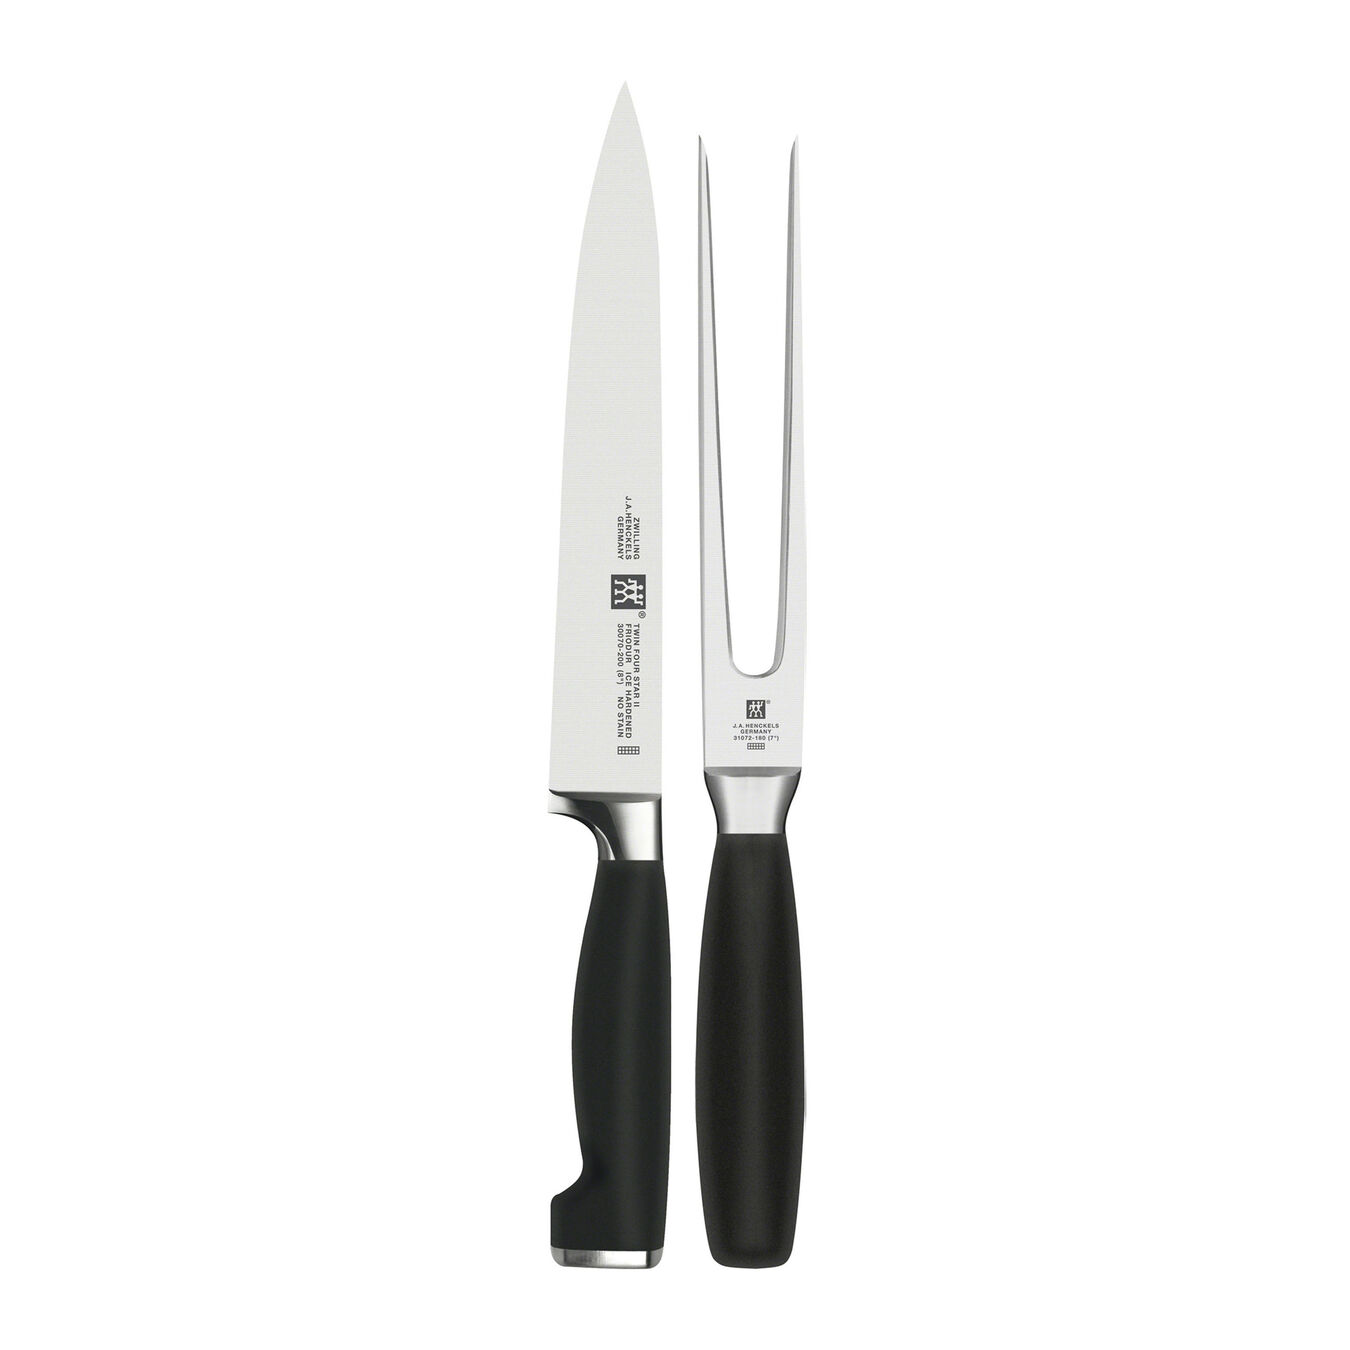 2-pc, Carving Knife and Fork Set,,large 1